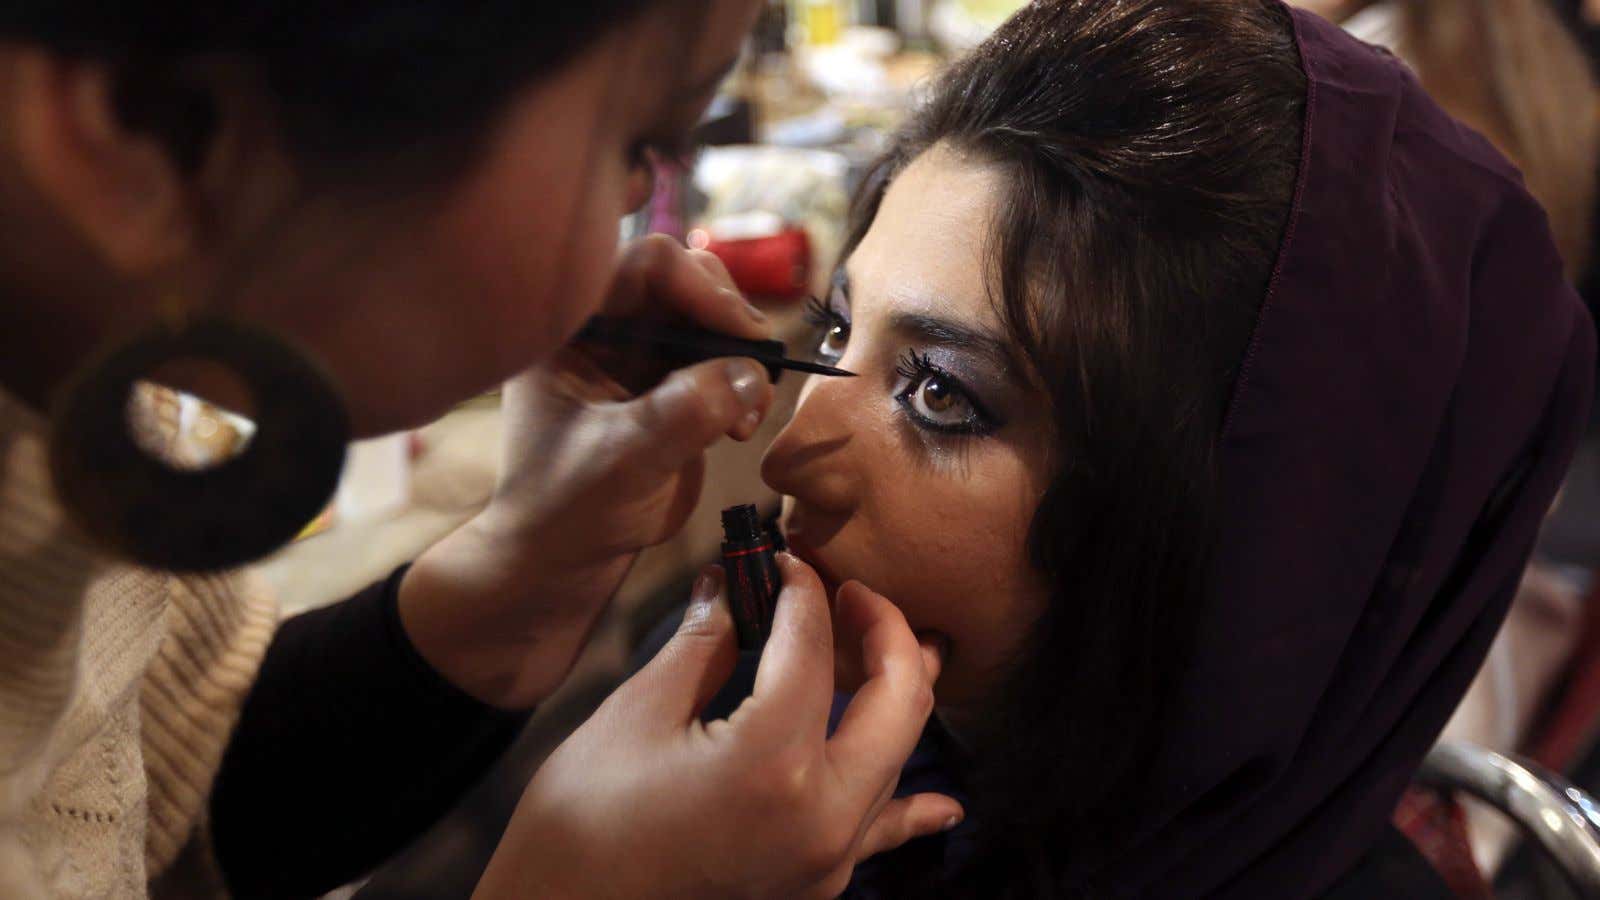 There’s growing demand for halal cosmetics in Southeast Asia and the Middle East